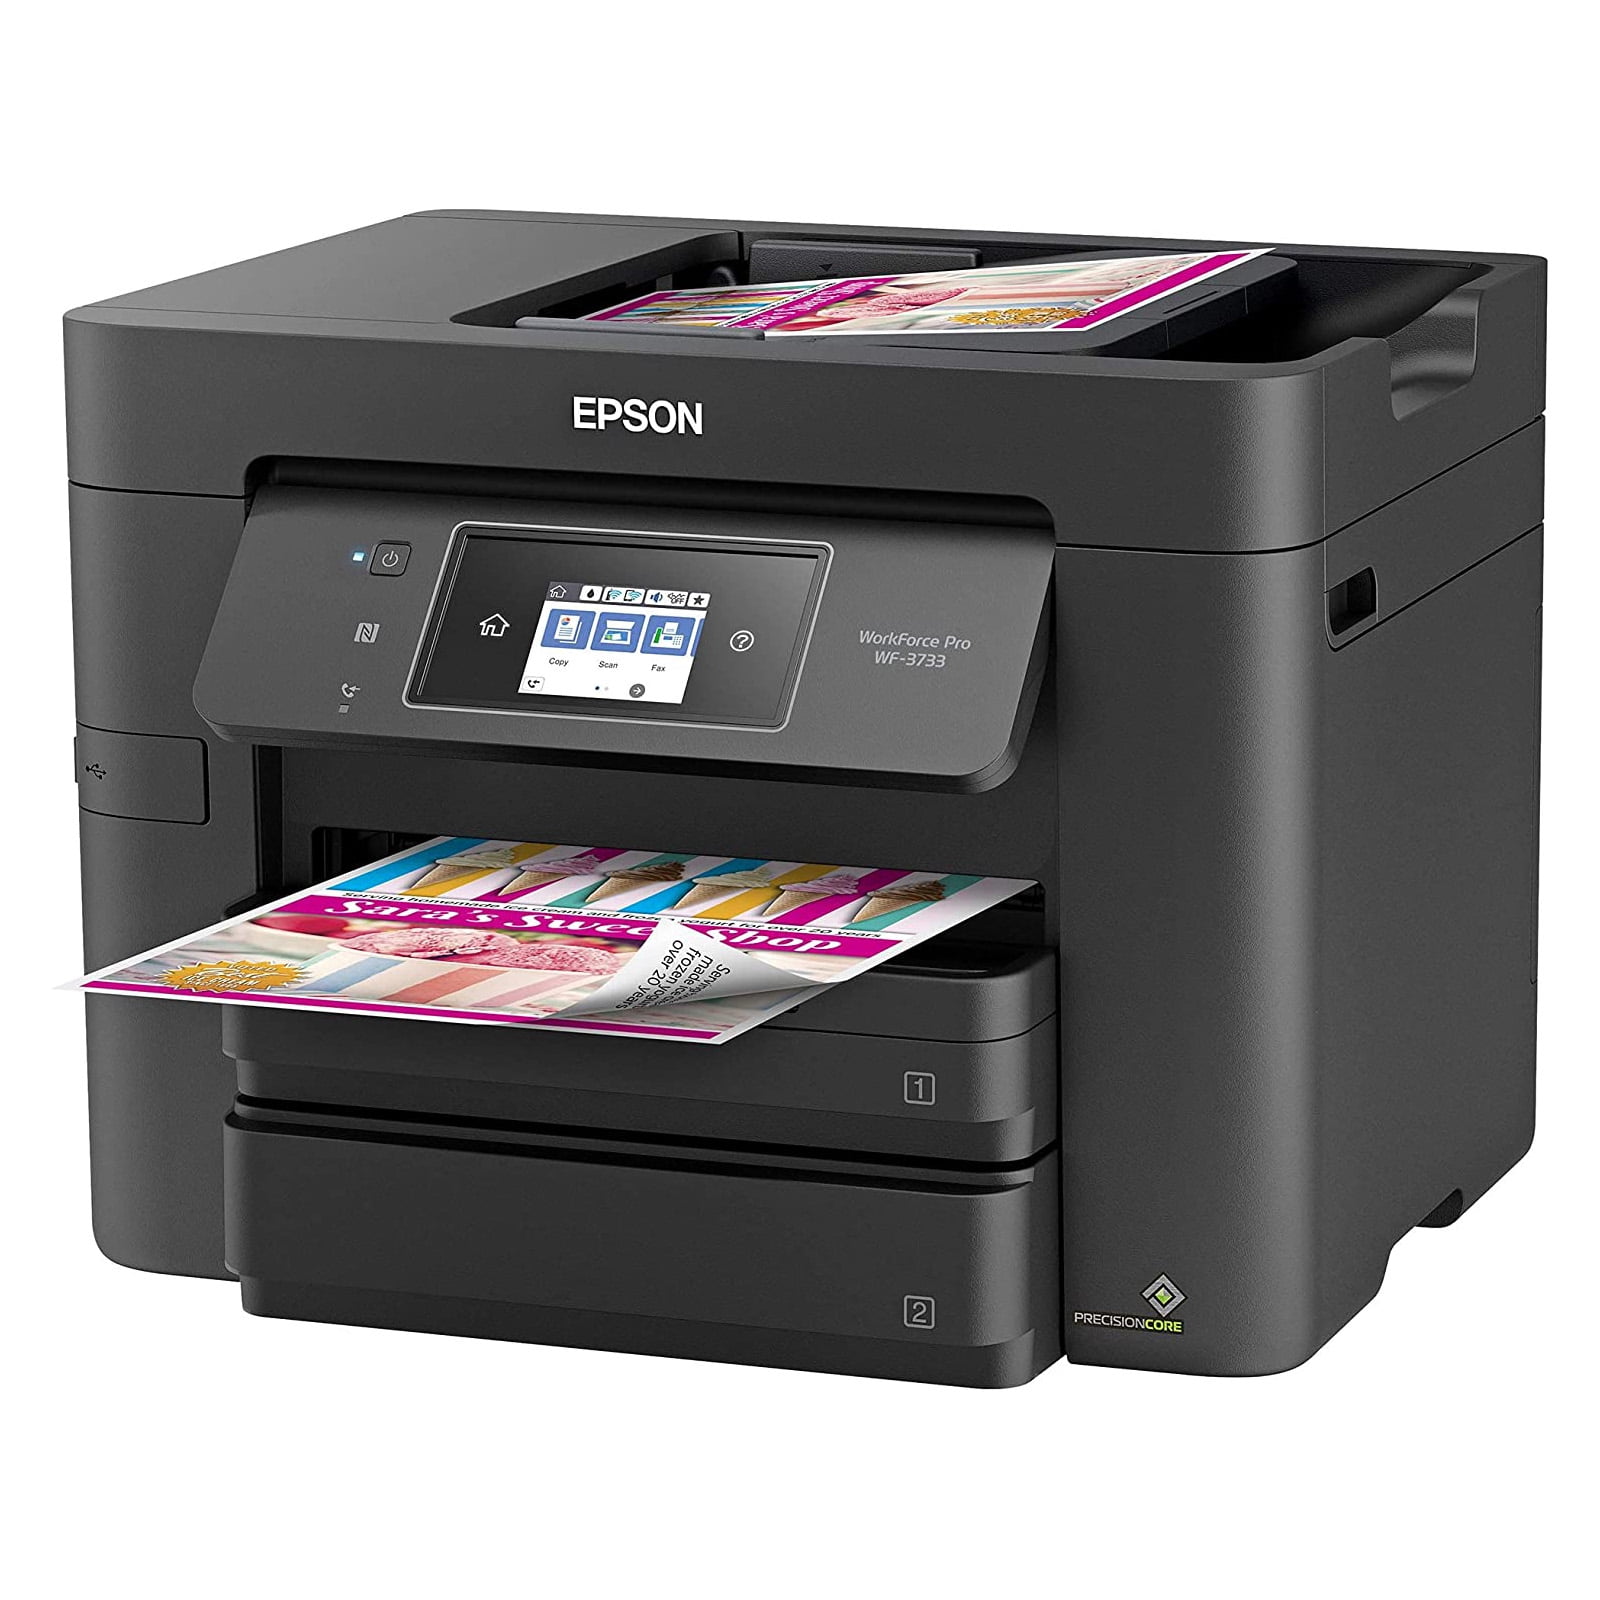 Epson Workforce Pro Wf 3733 Wireless All In One Color Inkjet Printer Home Office Printer 9773